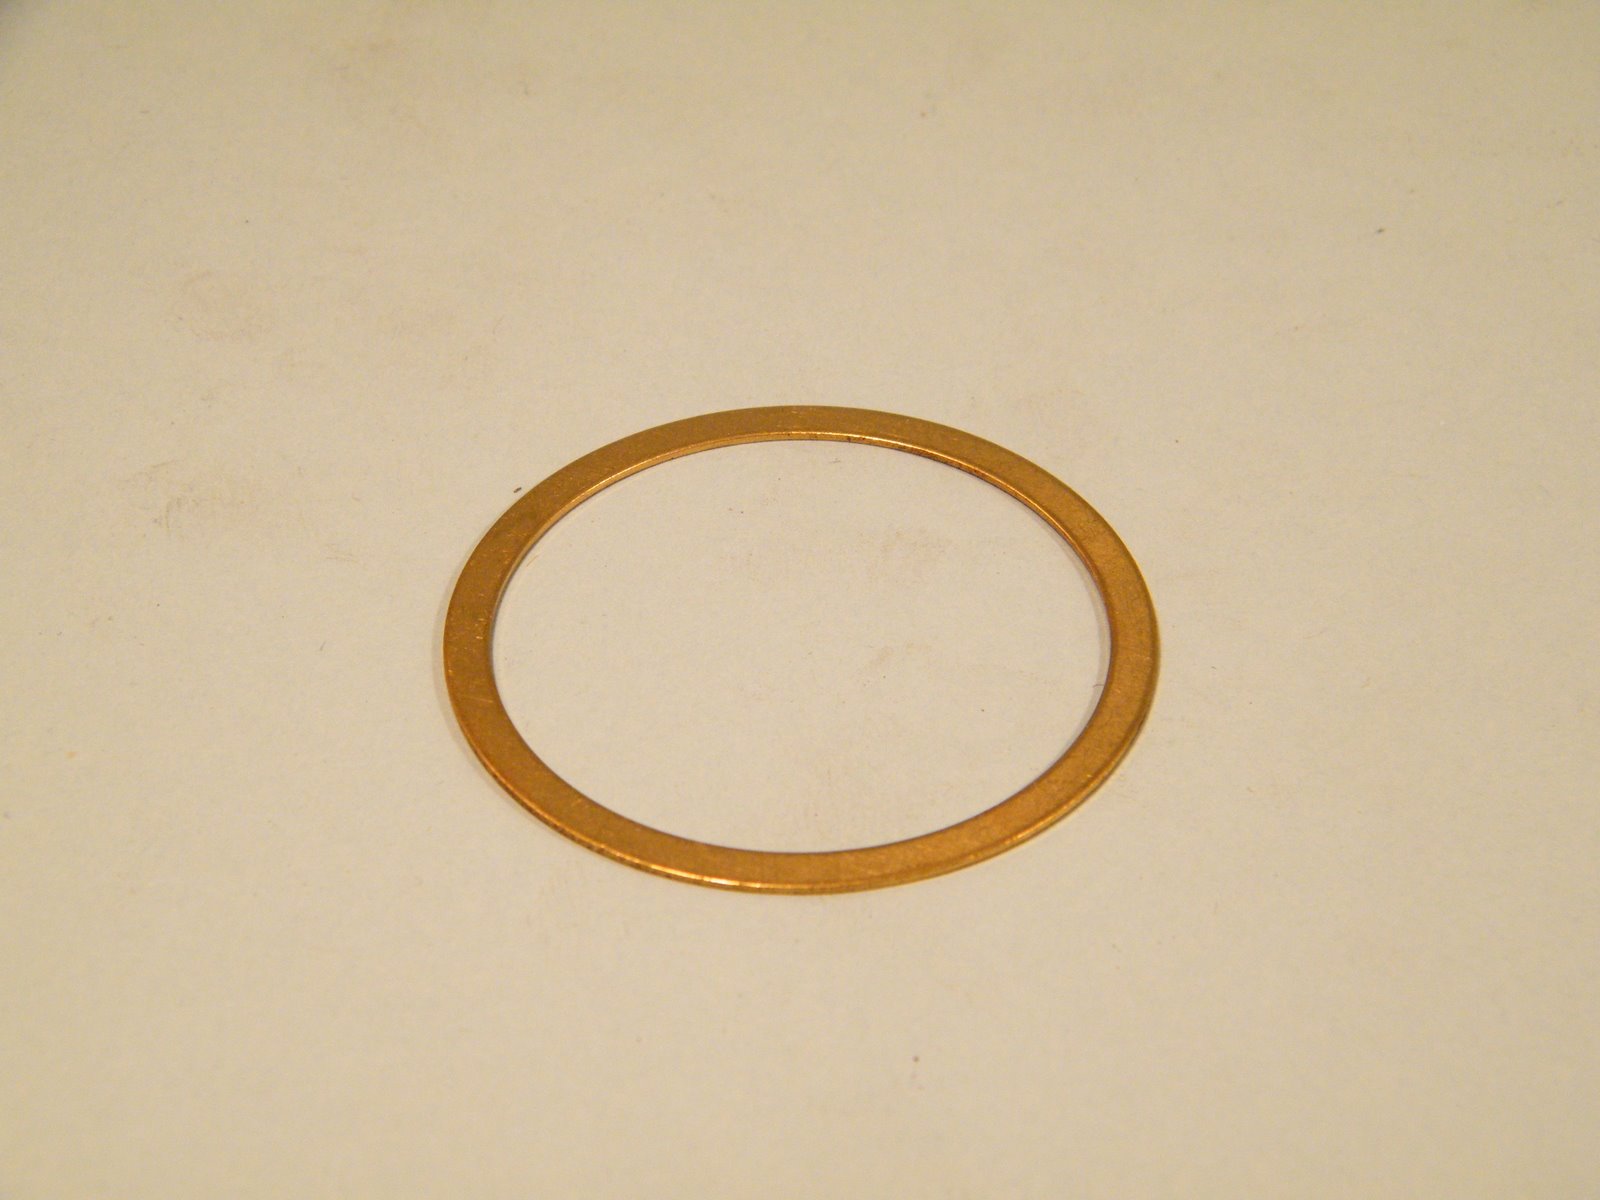 FRICTION RING S/J 1-1/2&quot; x
1-1/2 BRASS